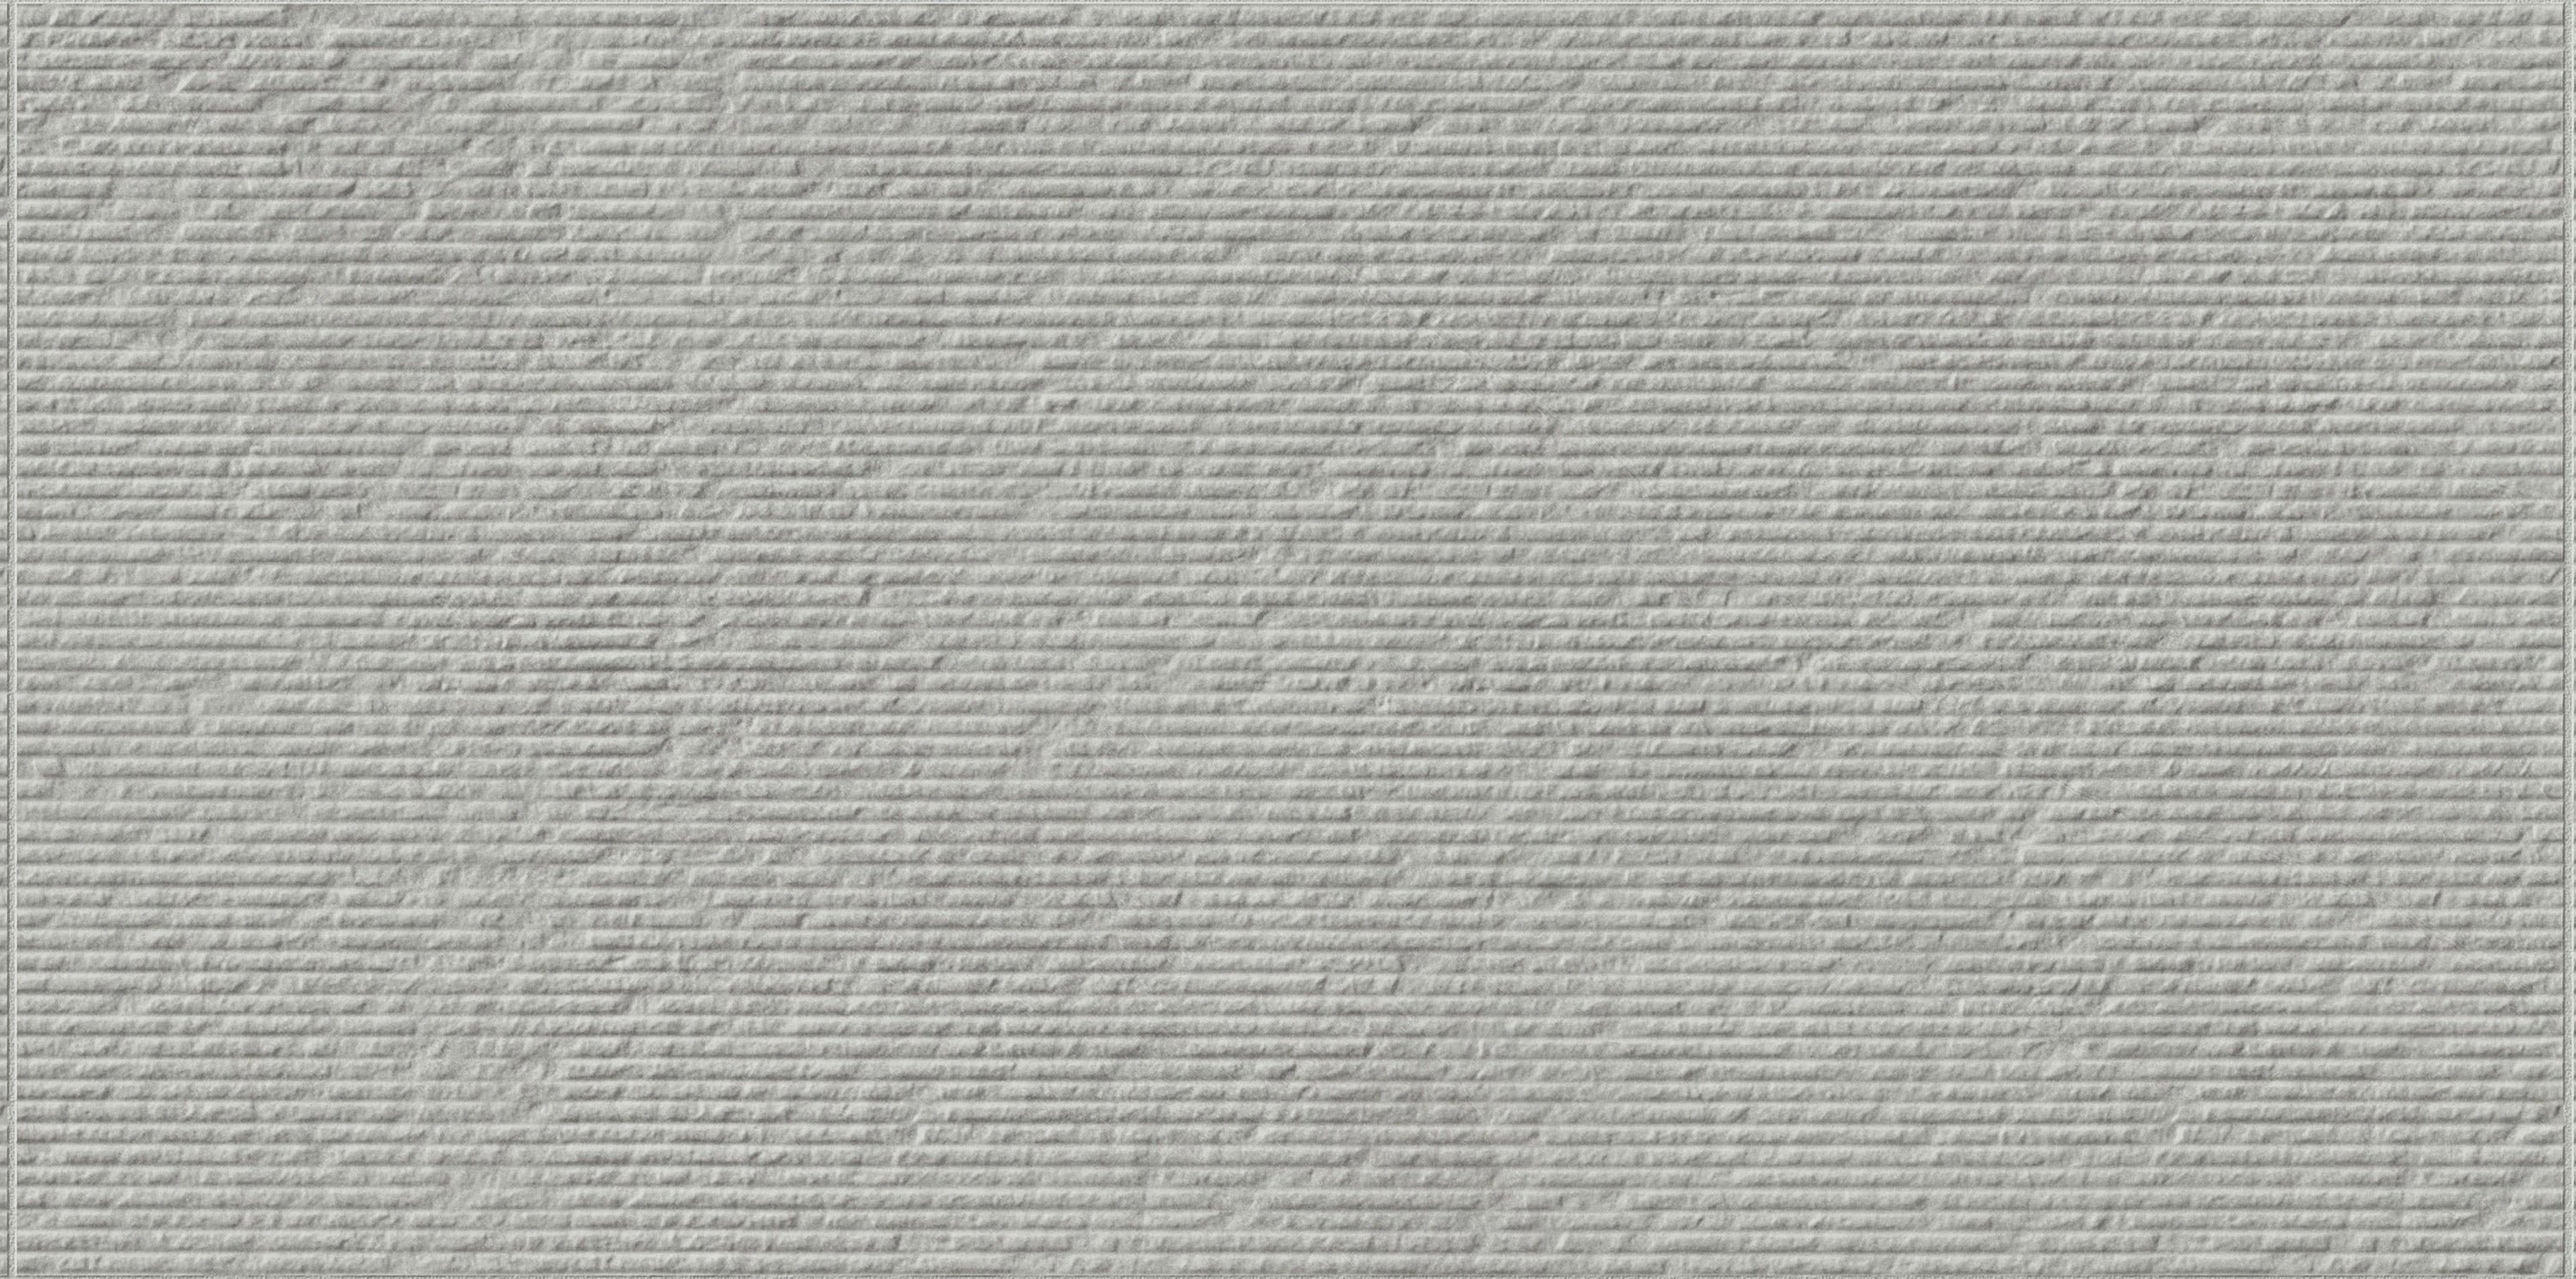 landmark 9 mm atelier montauk grey combed essence wall field tile 12x24x9mm matte rectified porcelain tile distributed by surface group international